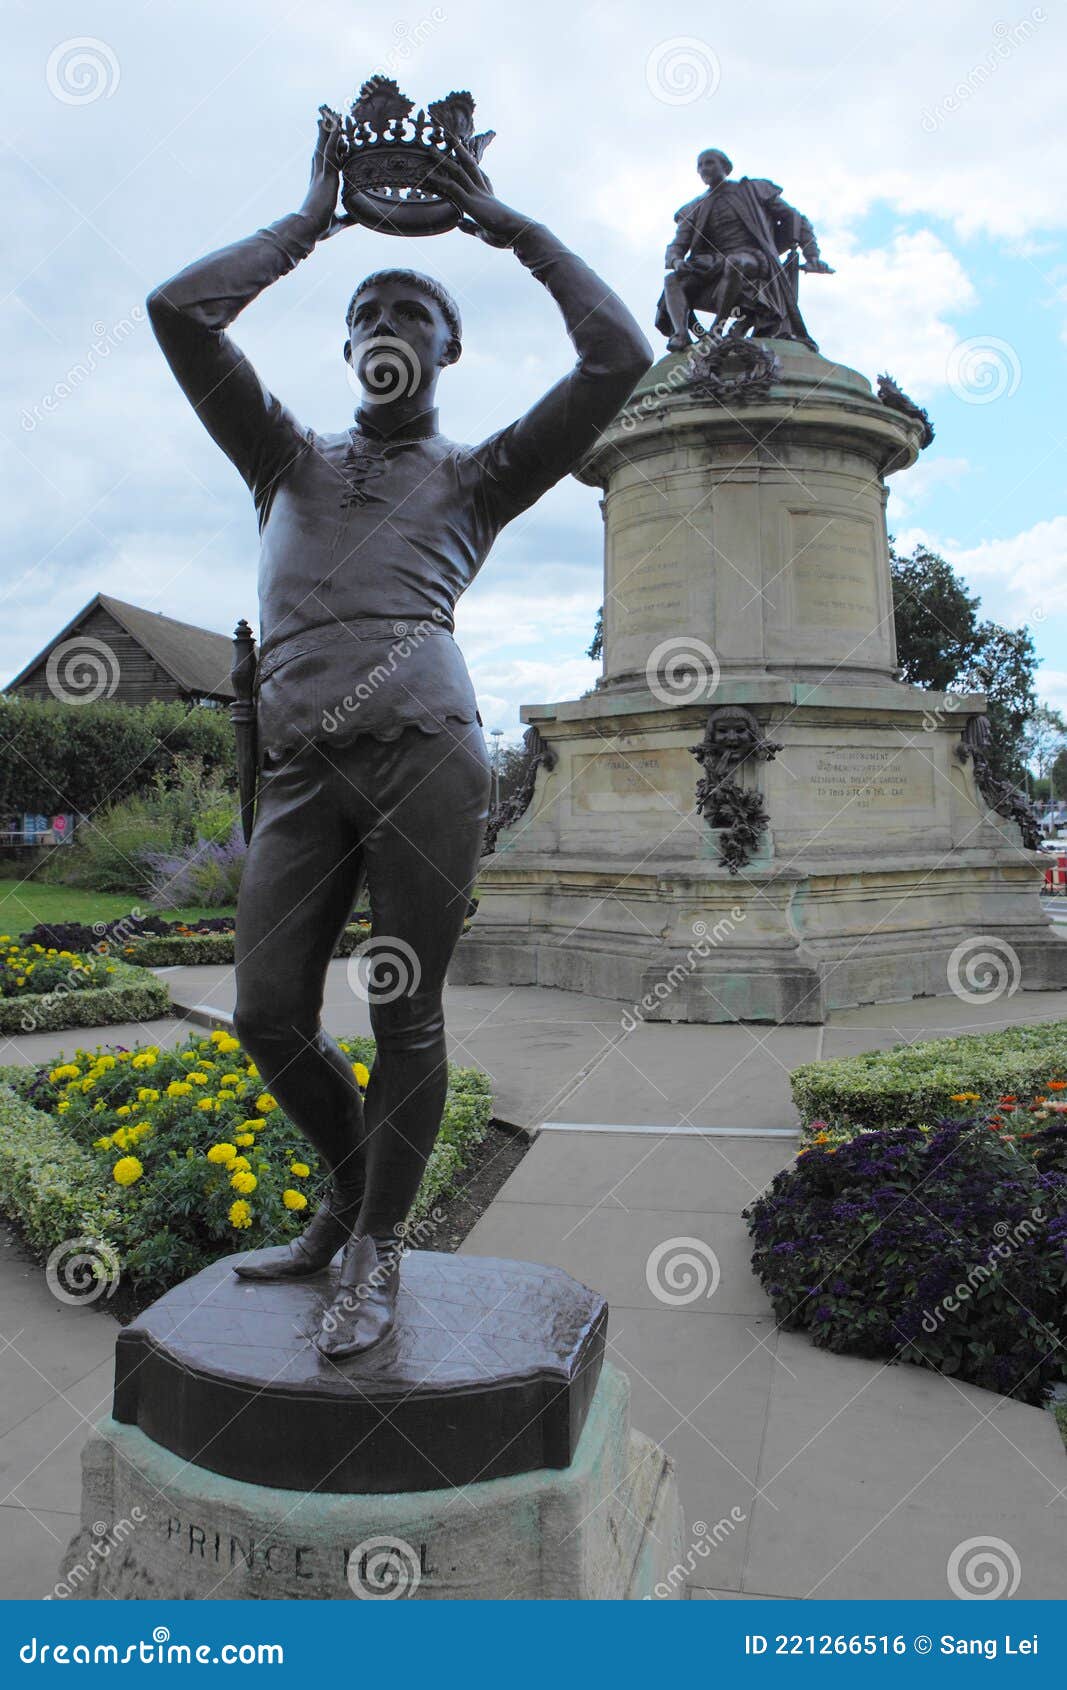 the statue of prince hal and shakespeare in the stratford upon avon